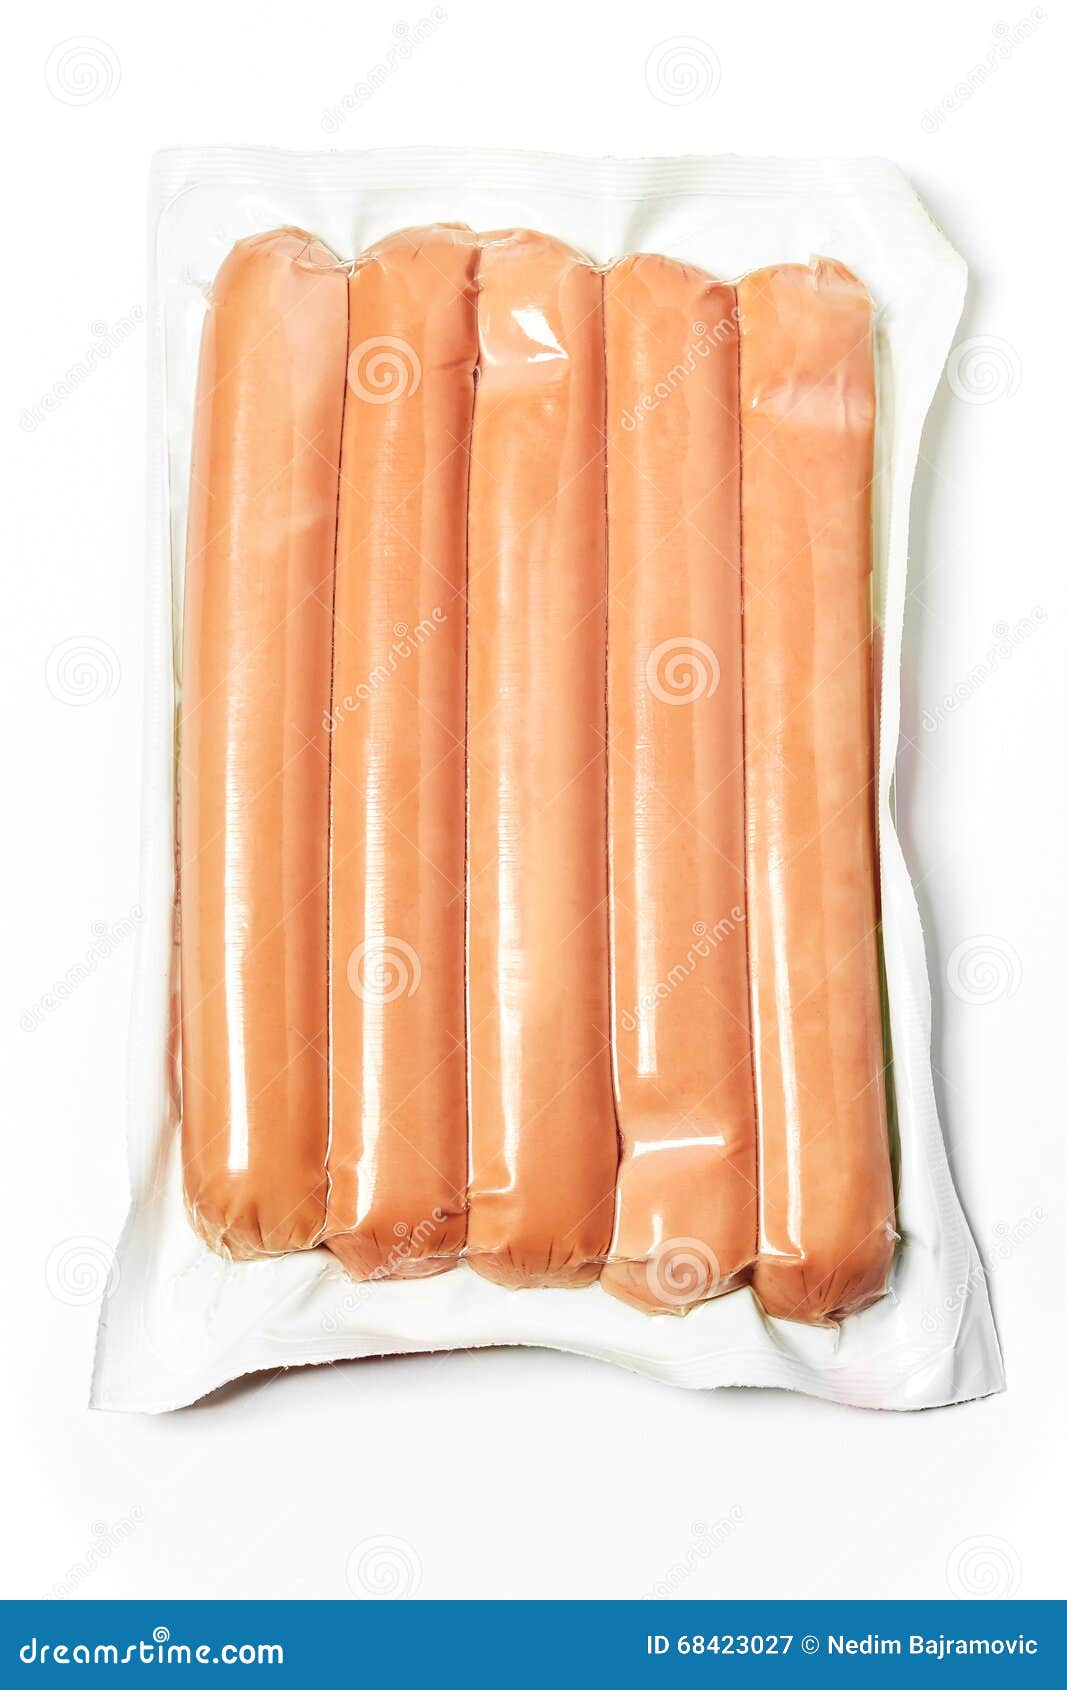 Pack Of Raw Hot Dogs In Plastic Packaging Stock Image - Image of meal, gastronomy: 68423027